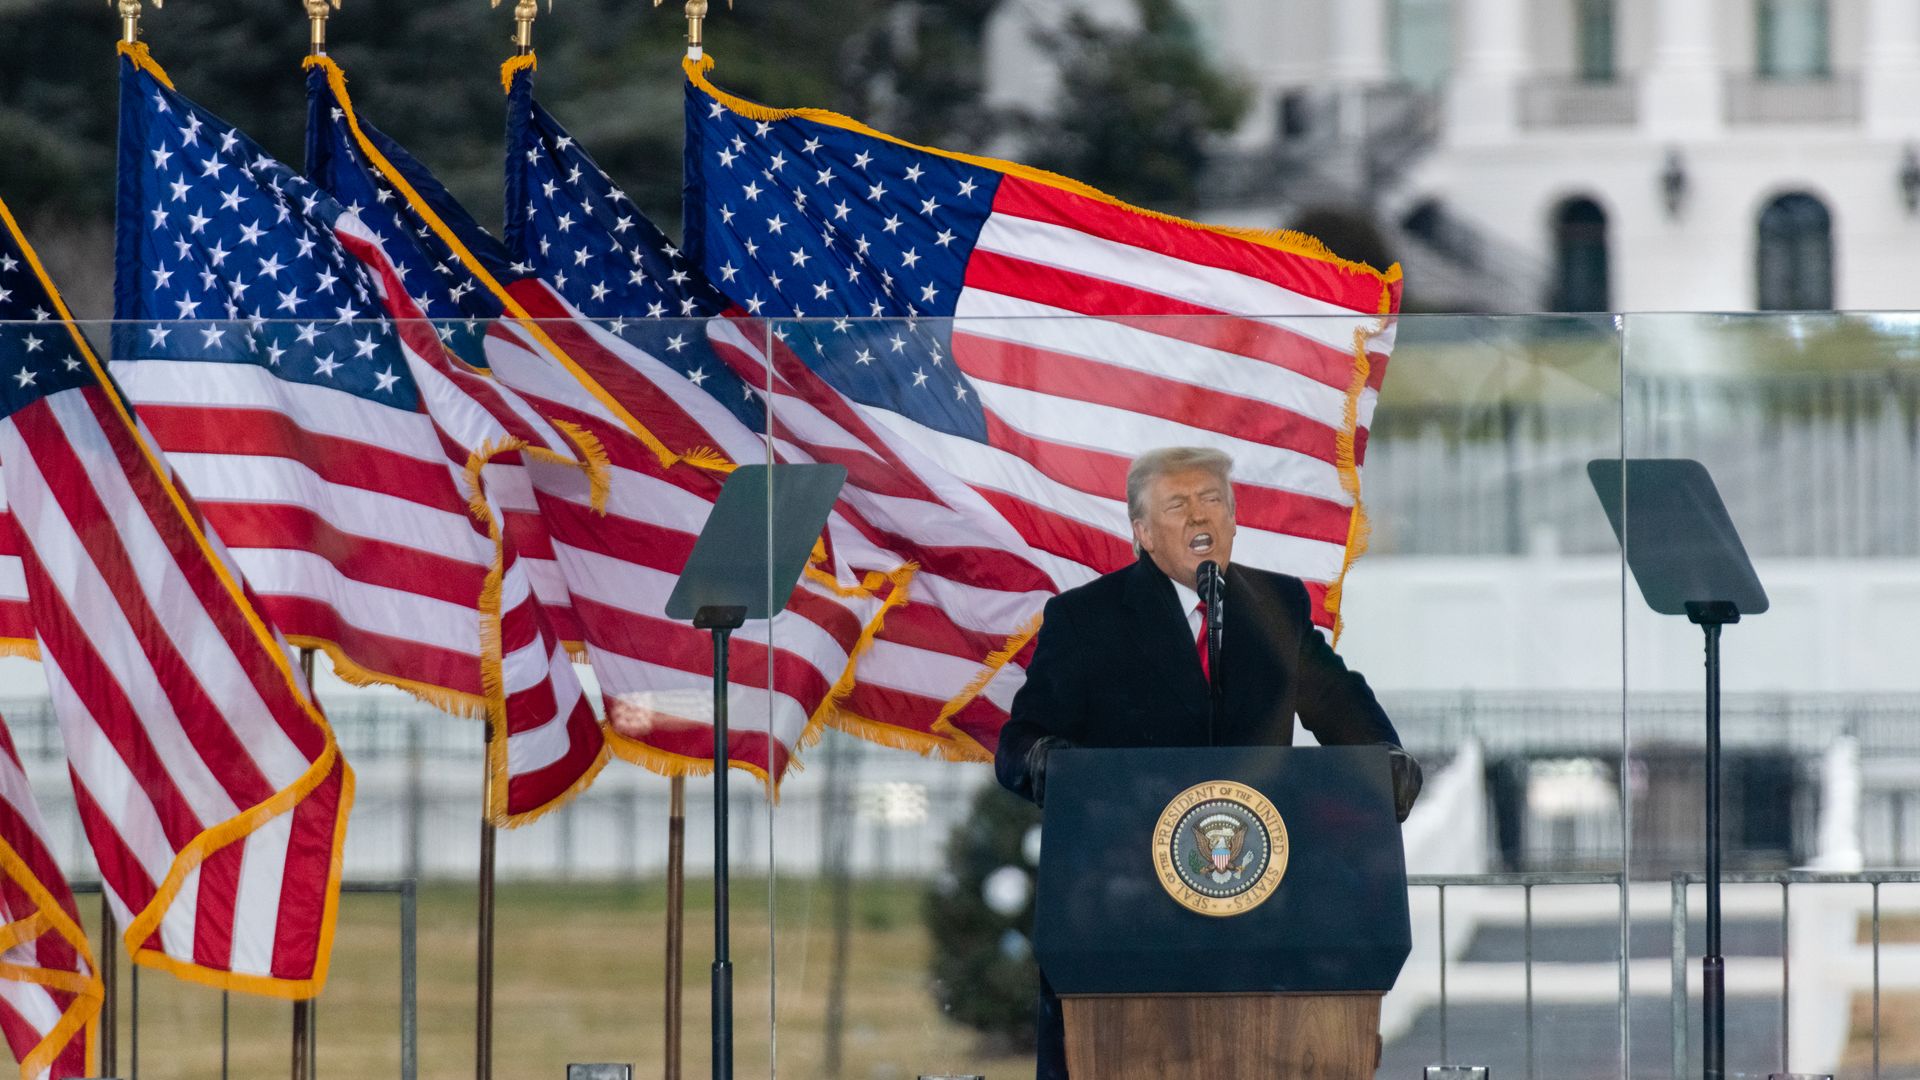 President Donald Trump speaks during a "Save America Rally" near the White House in Washington, D.C., U.S., on Wednesday, Jan. 6, 2021. 